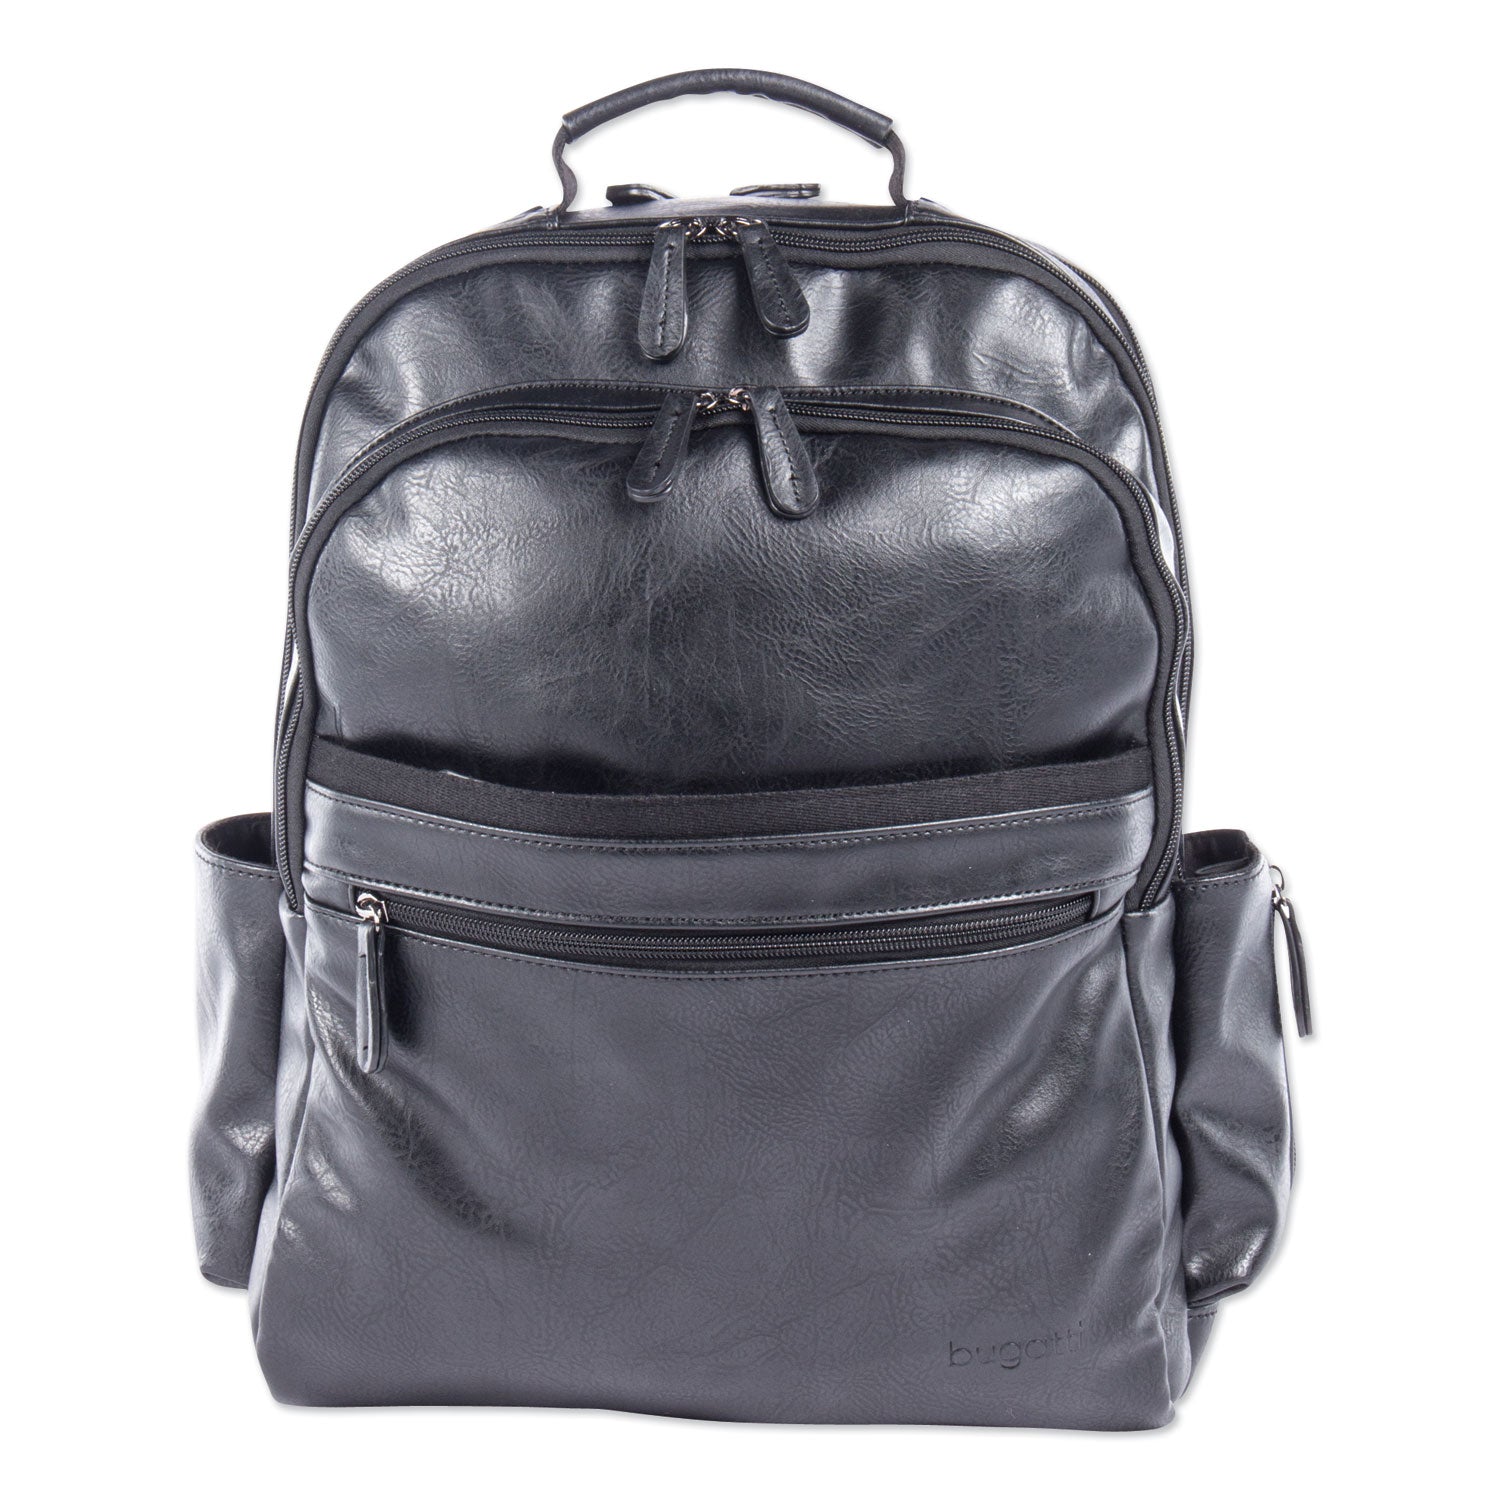 valais-backpack-fits-devices-up-to-156-leather-55-x-55-x-165-black_swzbkp116smbk - 2